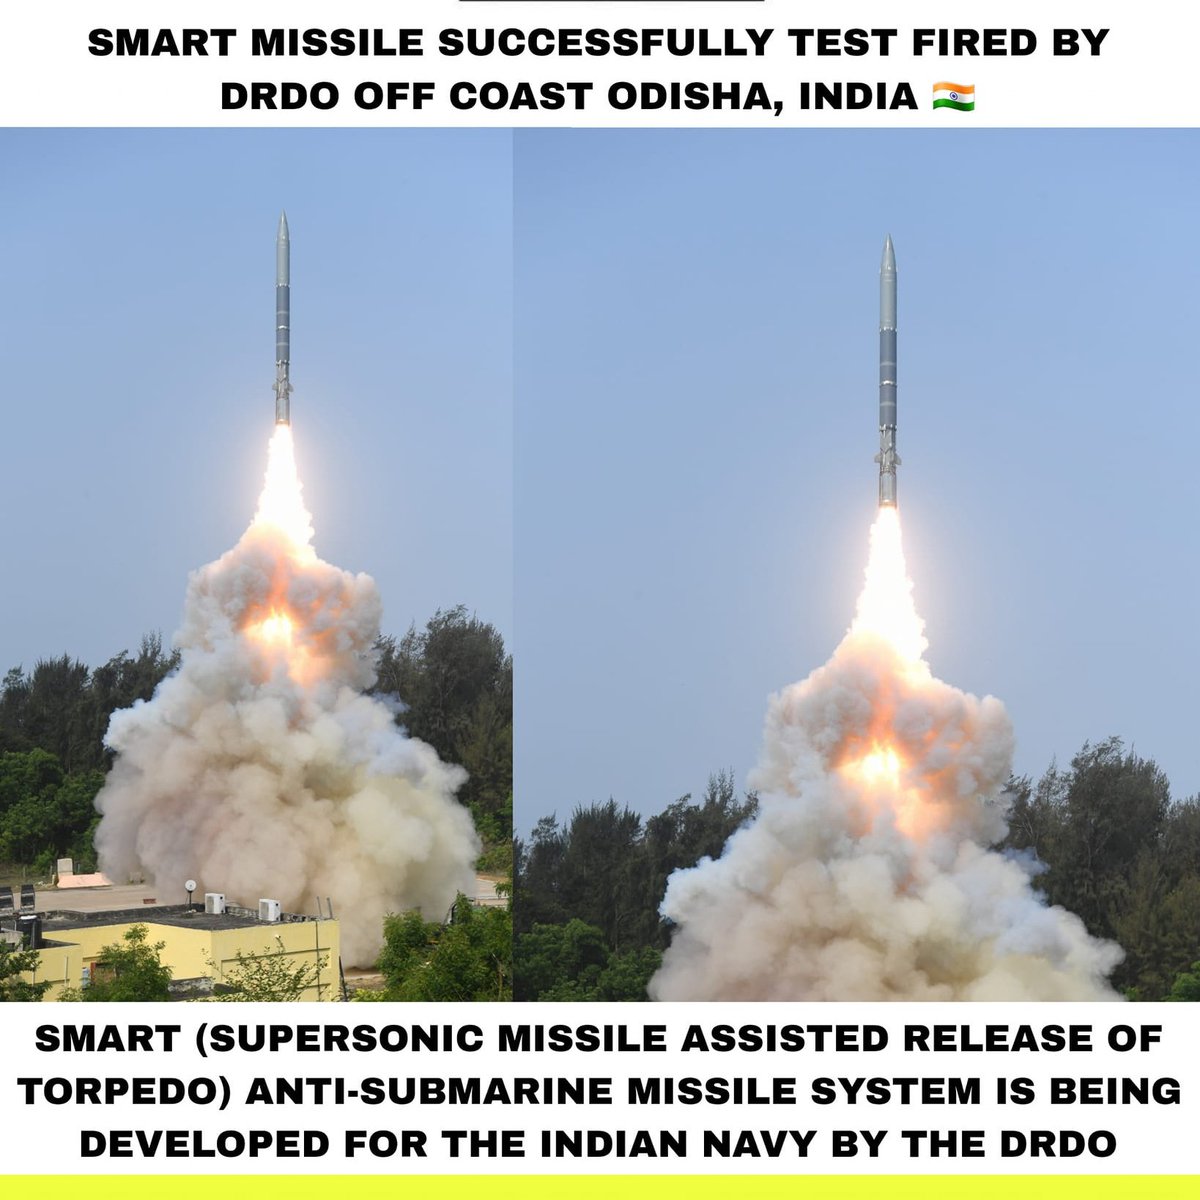 DRDO achieves a major milestone with the successful flight-testing of the SMART system on May 01, enhancing India's anti-submarine warfare capabilities. 🛳️ #SMARTSystem #DefenseTechnology #MissileTechnology #DRDOInnovation